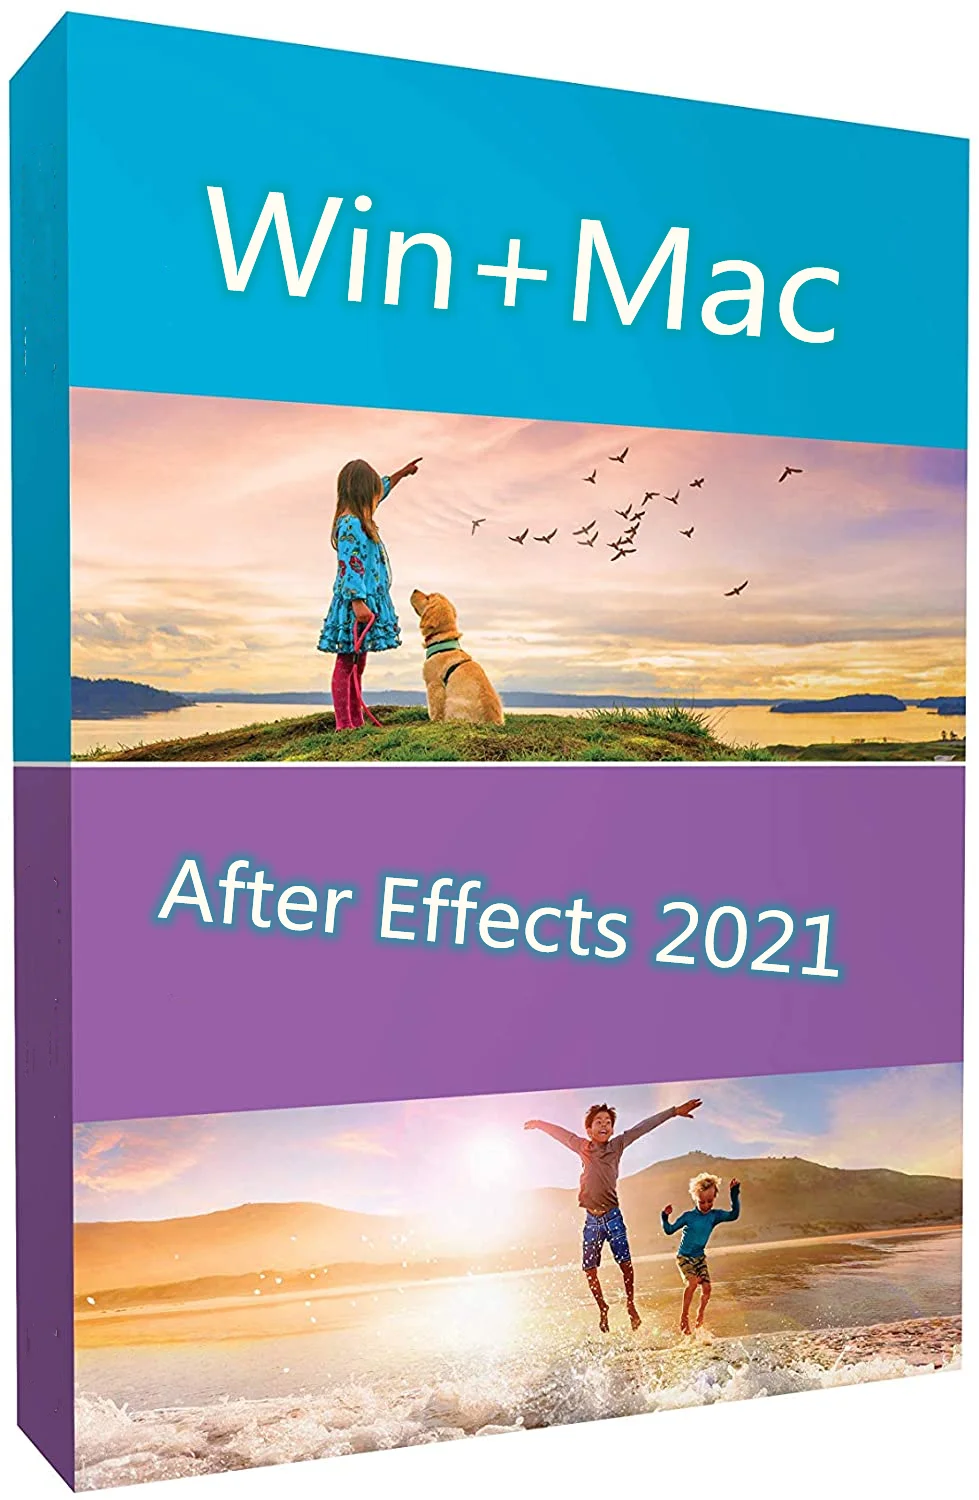 

After Effects CC 2021 Graphics And Video Processing Software